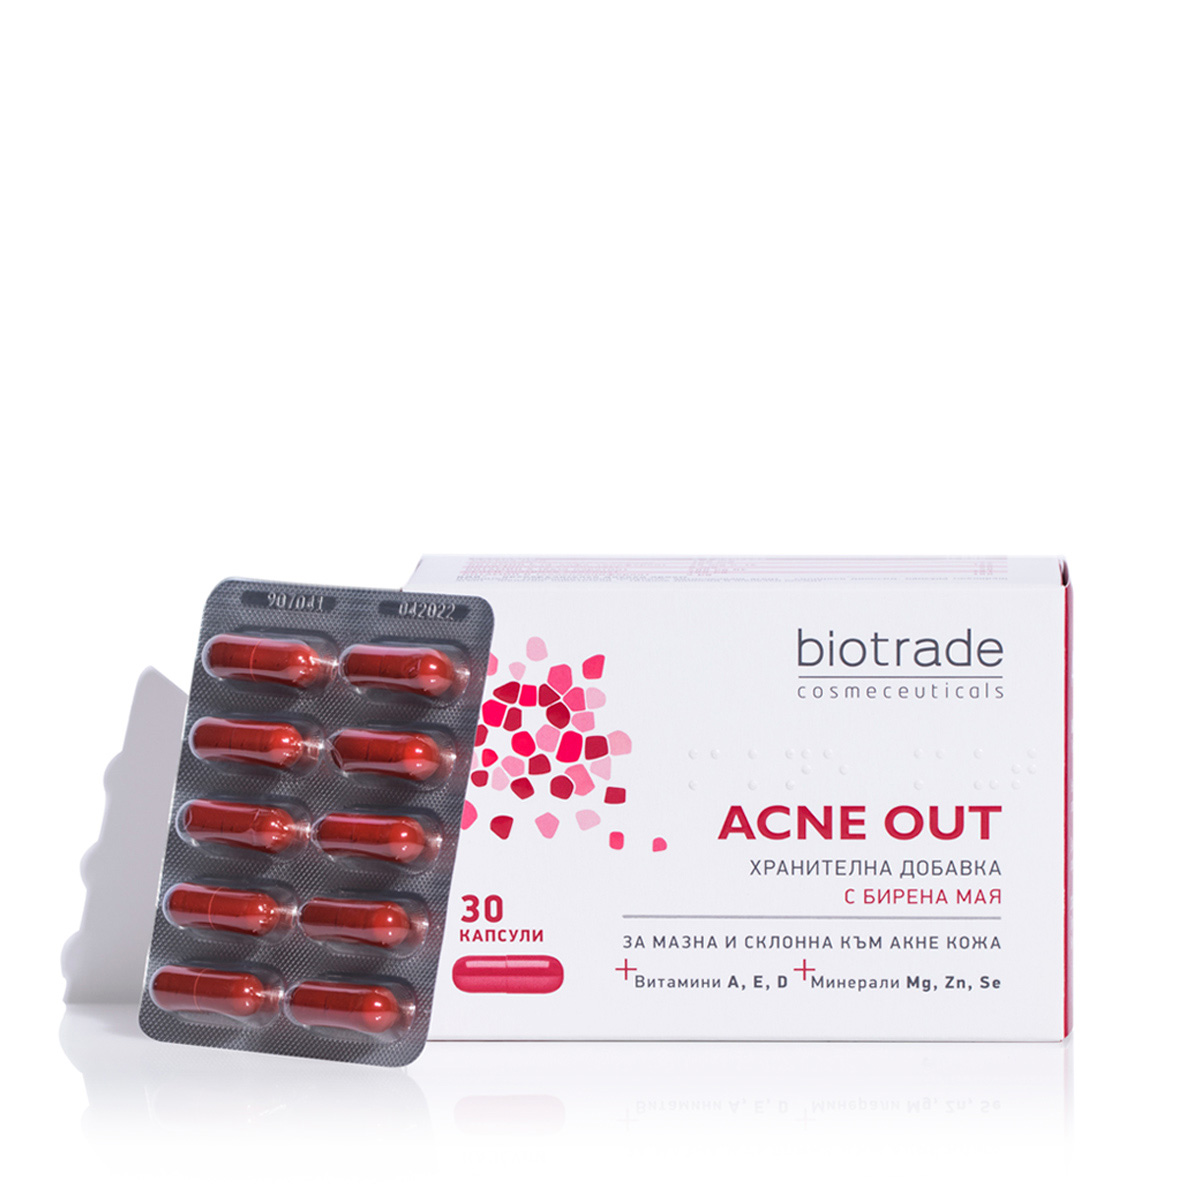 Adulti -  Acne out supliment alimentar, 30 capsule, sinapis.ro